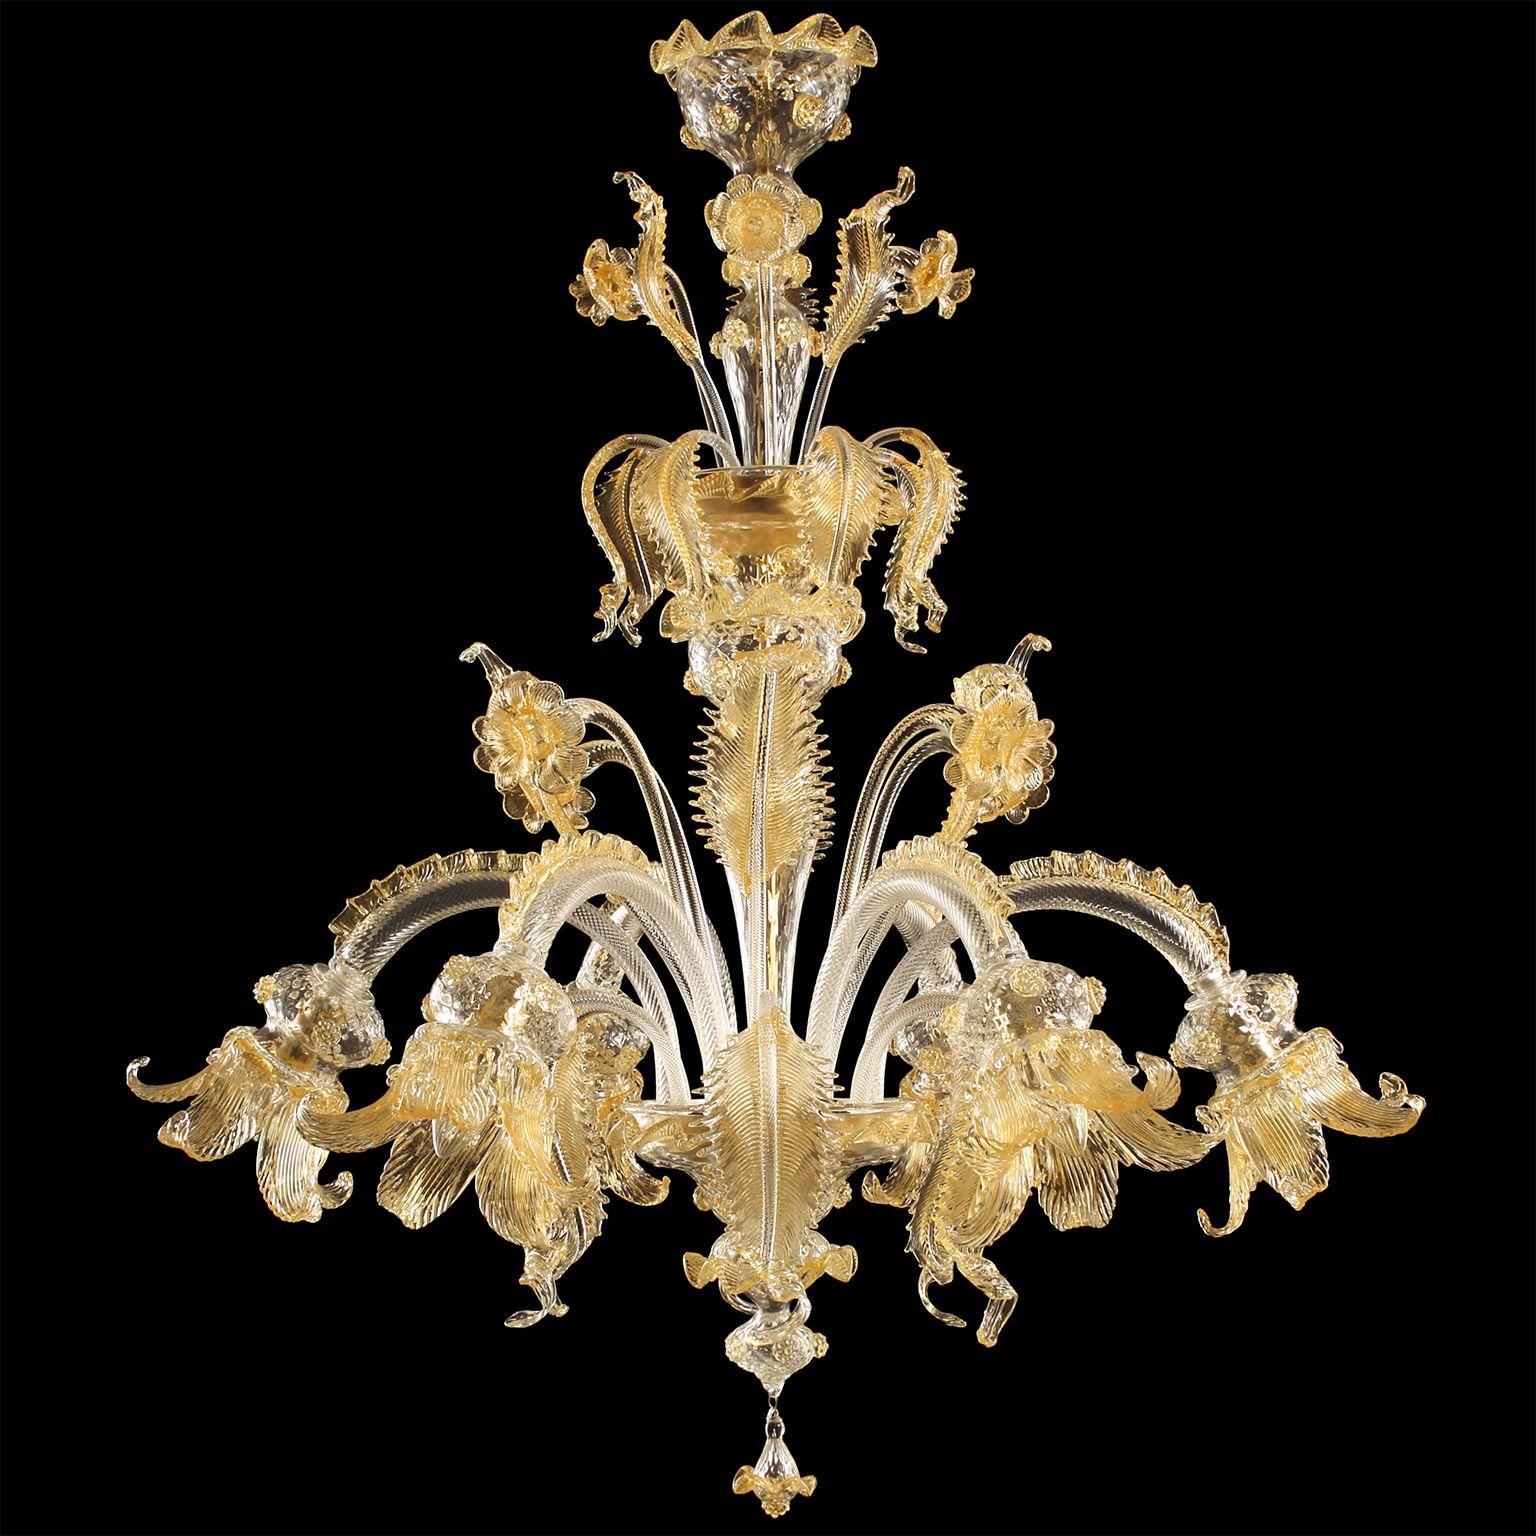 Luxury chandelier 6 arms clear and amber Murano glass with upper flowers and leaves Golden-Century 86 by Multiforme
The collection of artistic glass chandeliers Golden Century 086 is a tribute to the golden and luxurious Venice of the XVIIIth. The